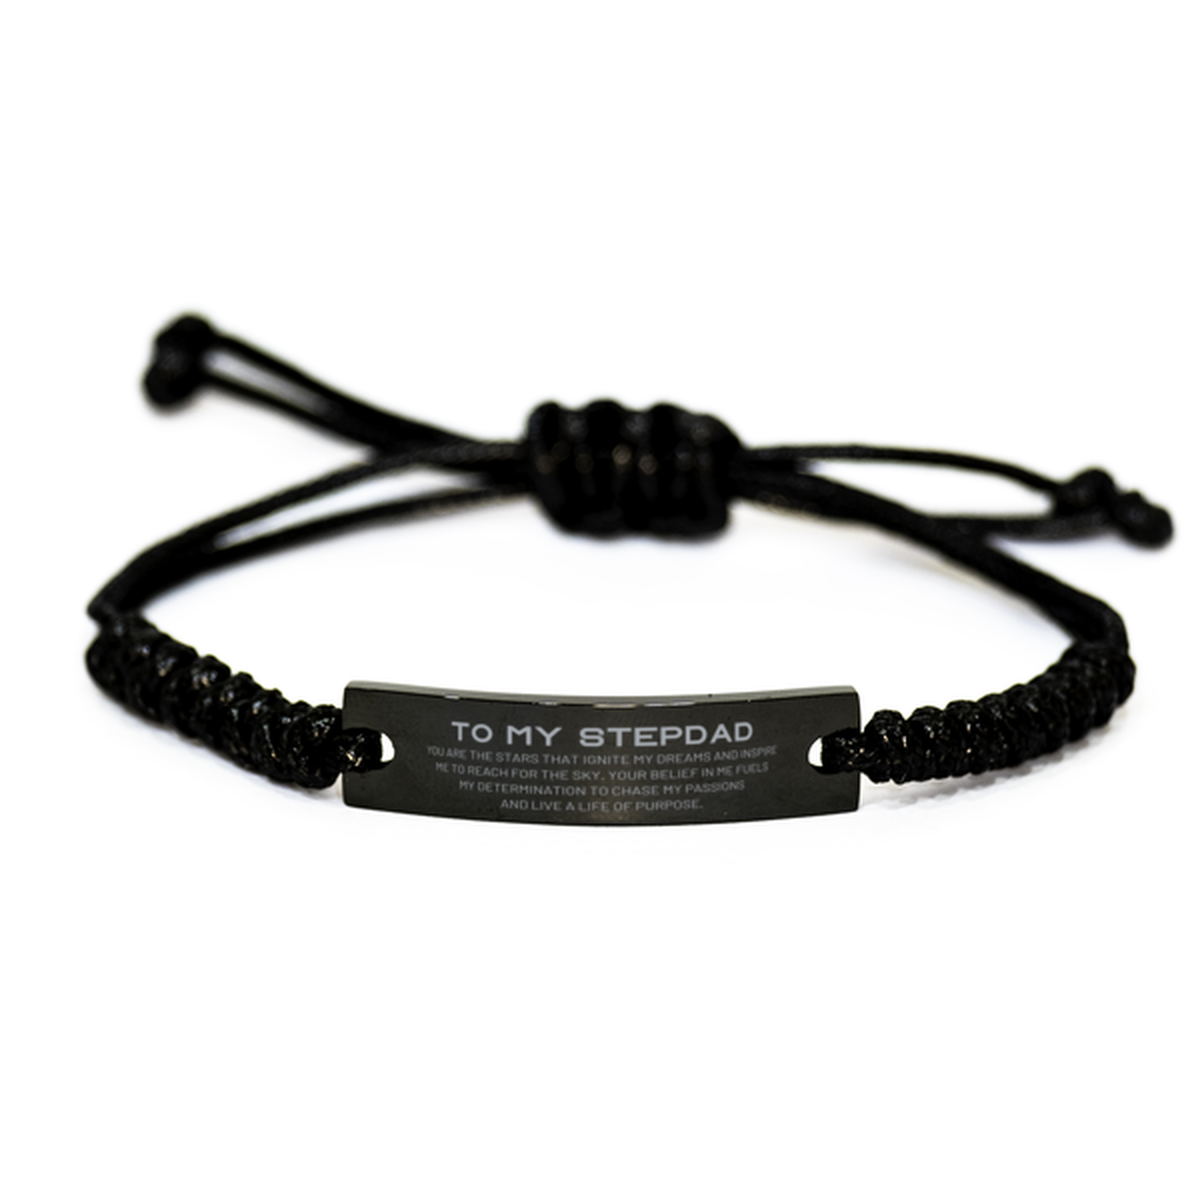 To My Stepdad Black Rope Bracelet, You are the stars that ignite my dreams and inspire me to reach for the sky, Birthday Unique Gifts For Stepdad, Thank You Gifts For Stepdad